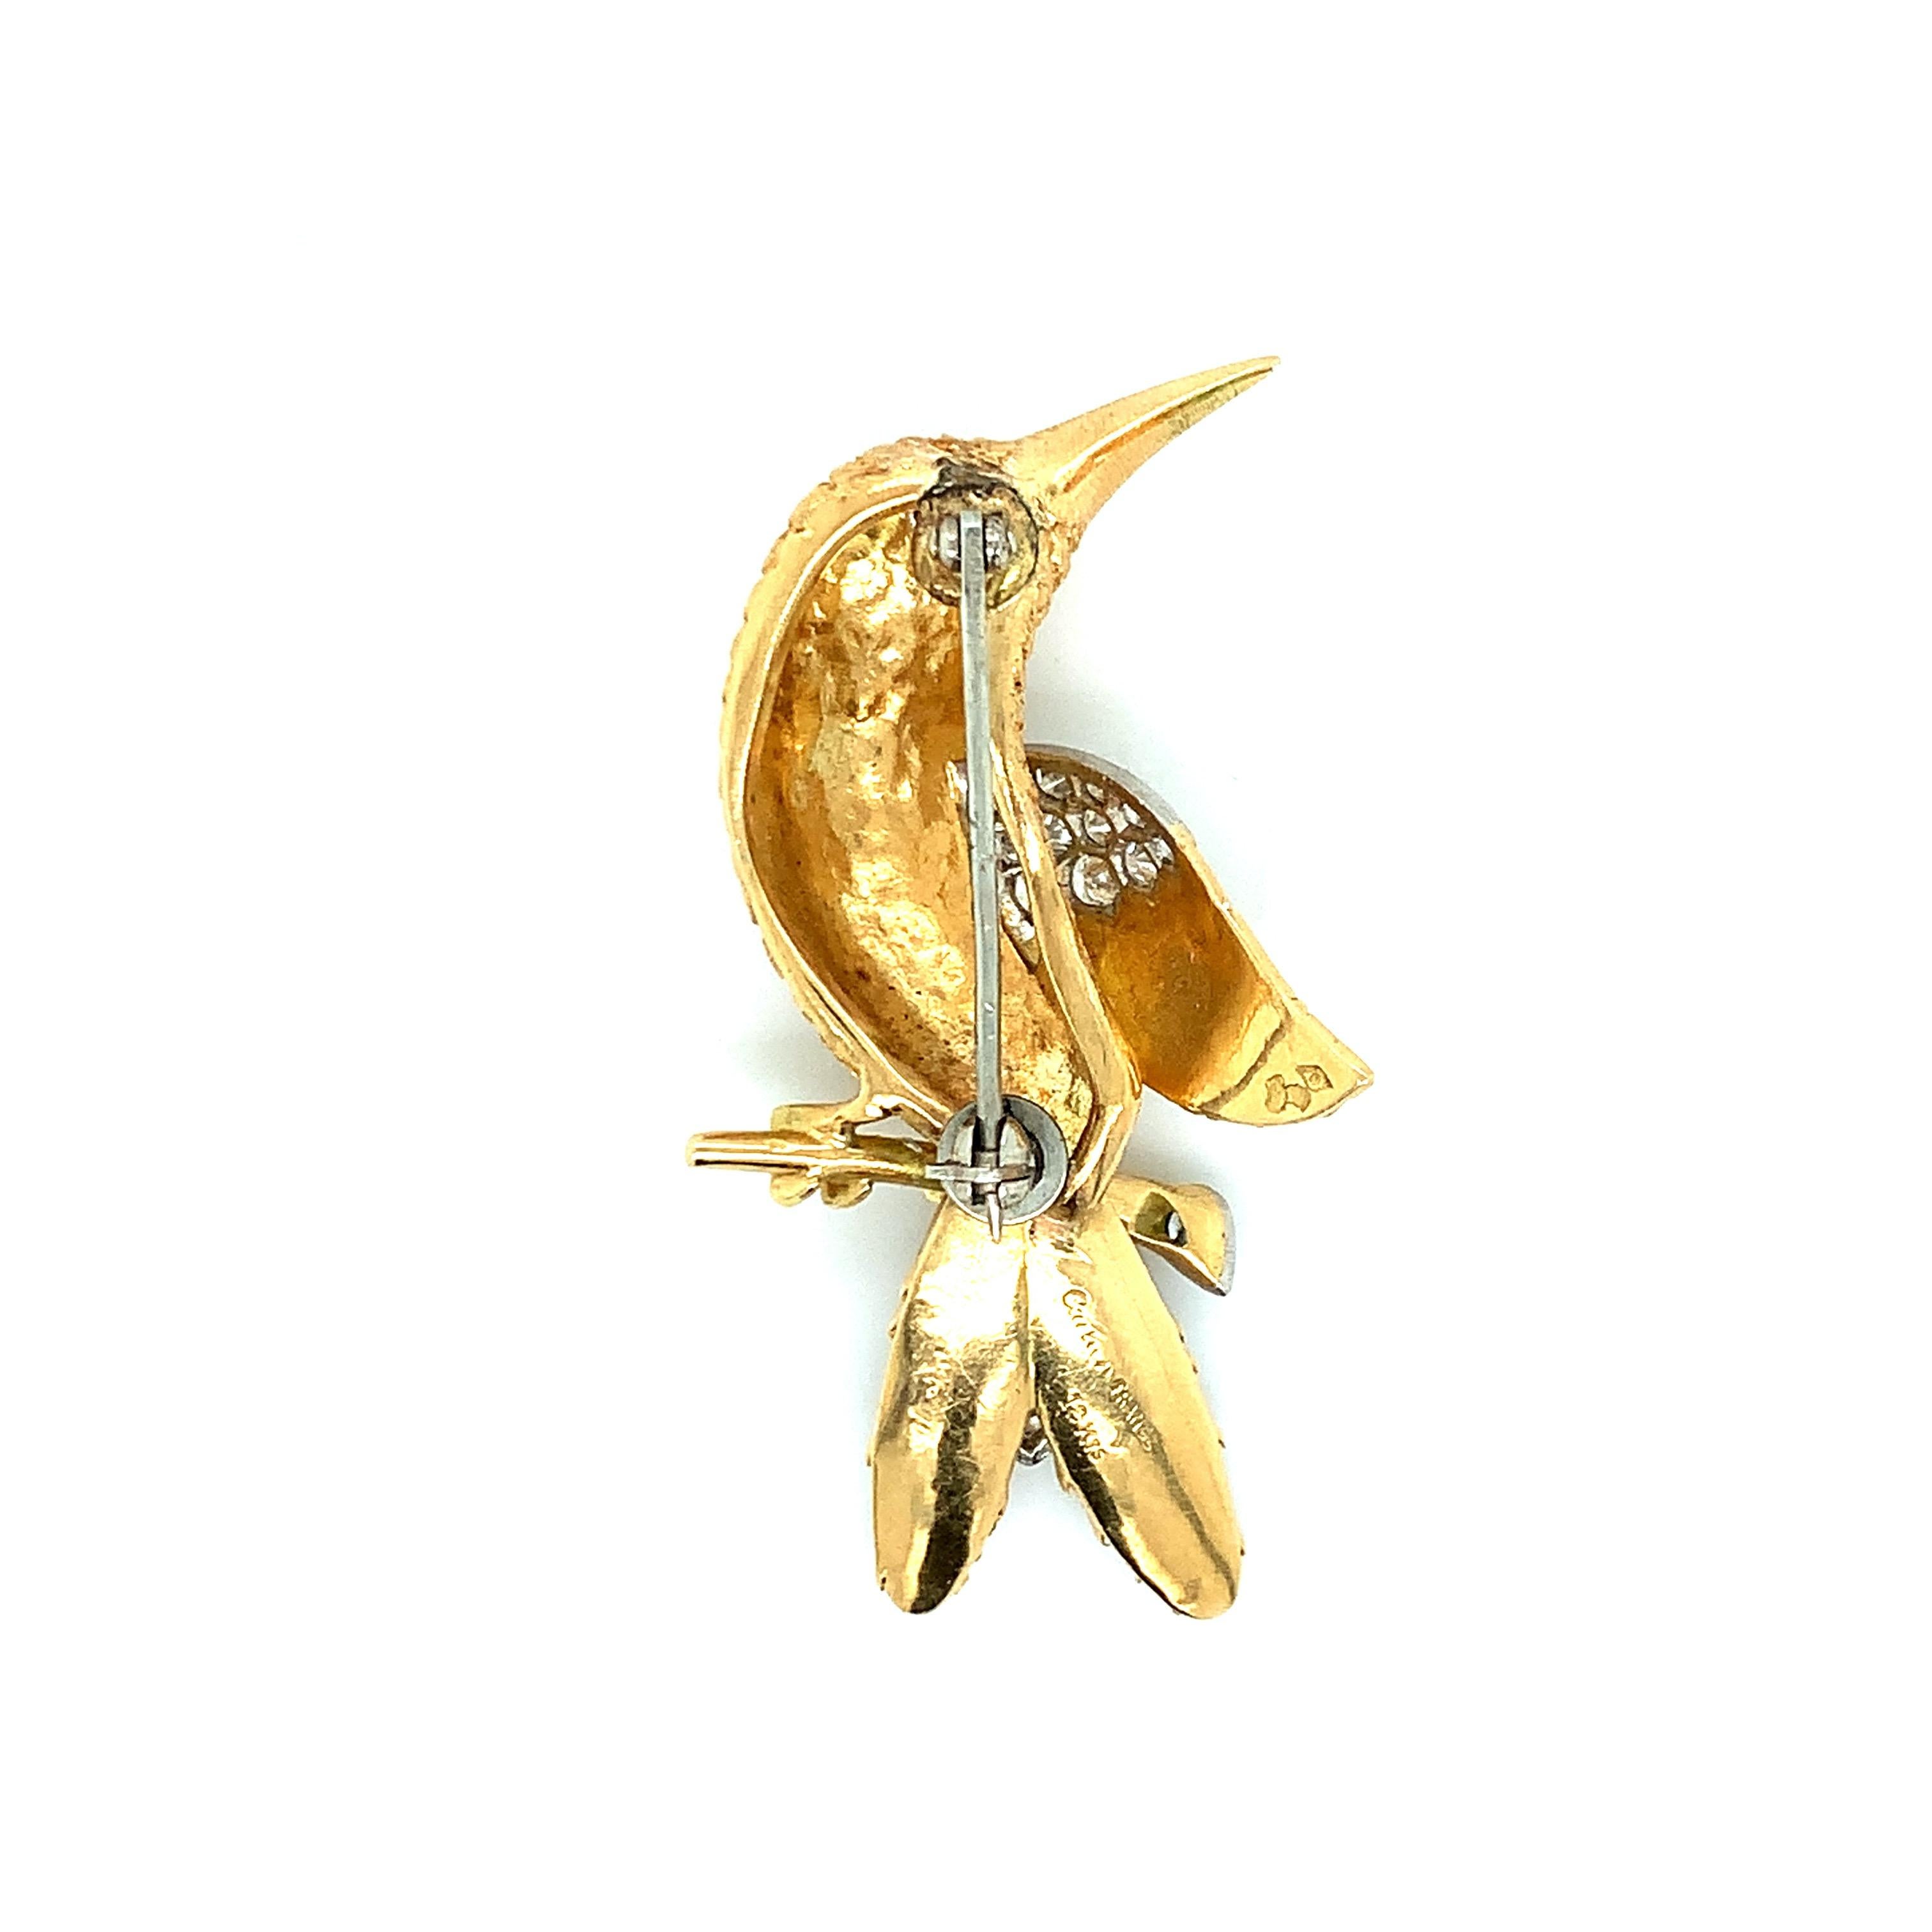 Cartier 18 karat yellow gold hummingbird brooch, consisting of 16 brilliant cut diamonds weighing approximately 0.80 carat and one sapphire for the eye. Marked: Cartier / France / 18kts. Total weight: 13.1 grams. Width: 2.5 cm. Length: 4.7 cm. 
